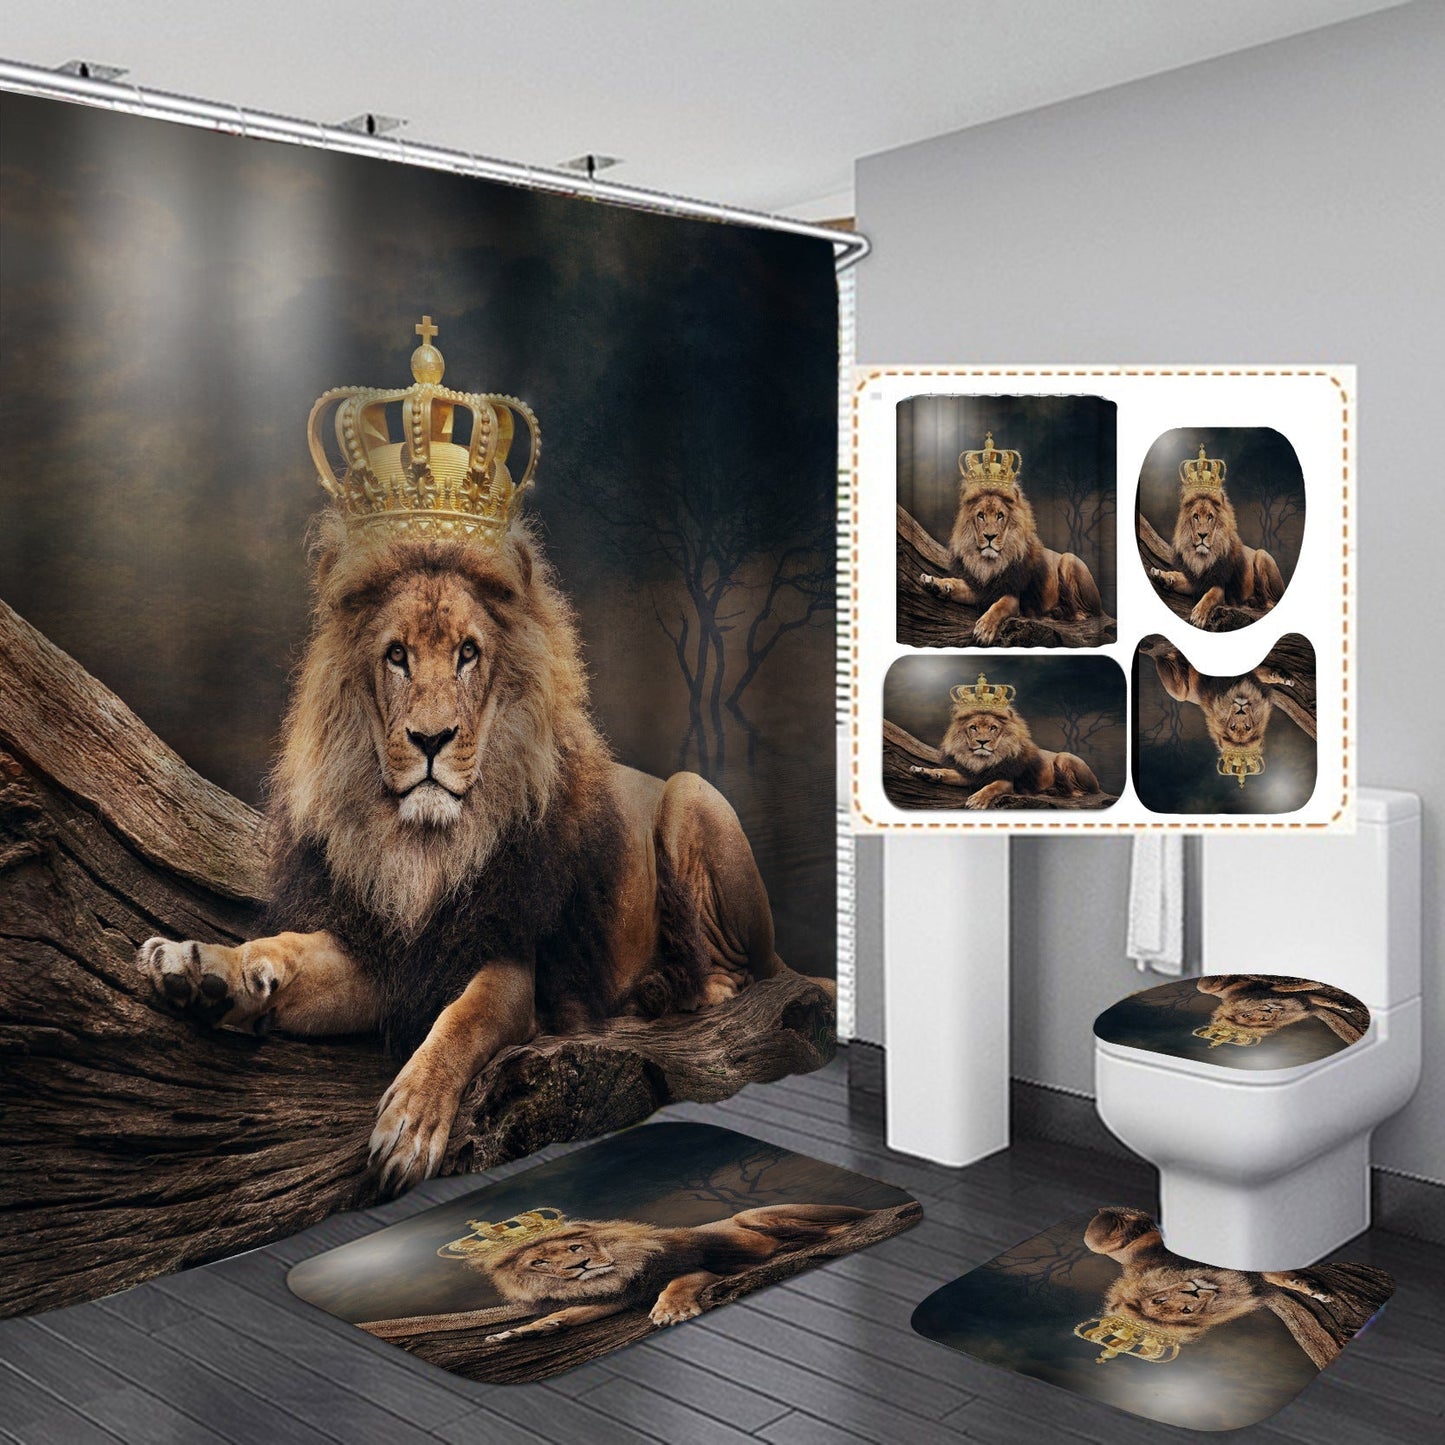 3D Lion Design Shower Curtain Bathroom SetsNon-Slip Toilet Lid Cover-Shower Curtain-180×180cm Shower Curtain Only-3-Free Shipping at meselling99